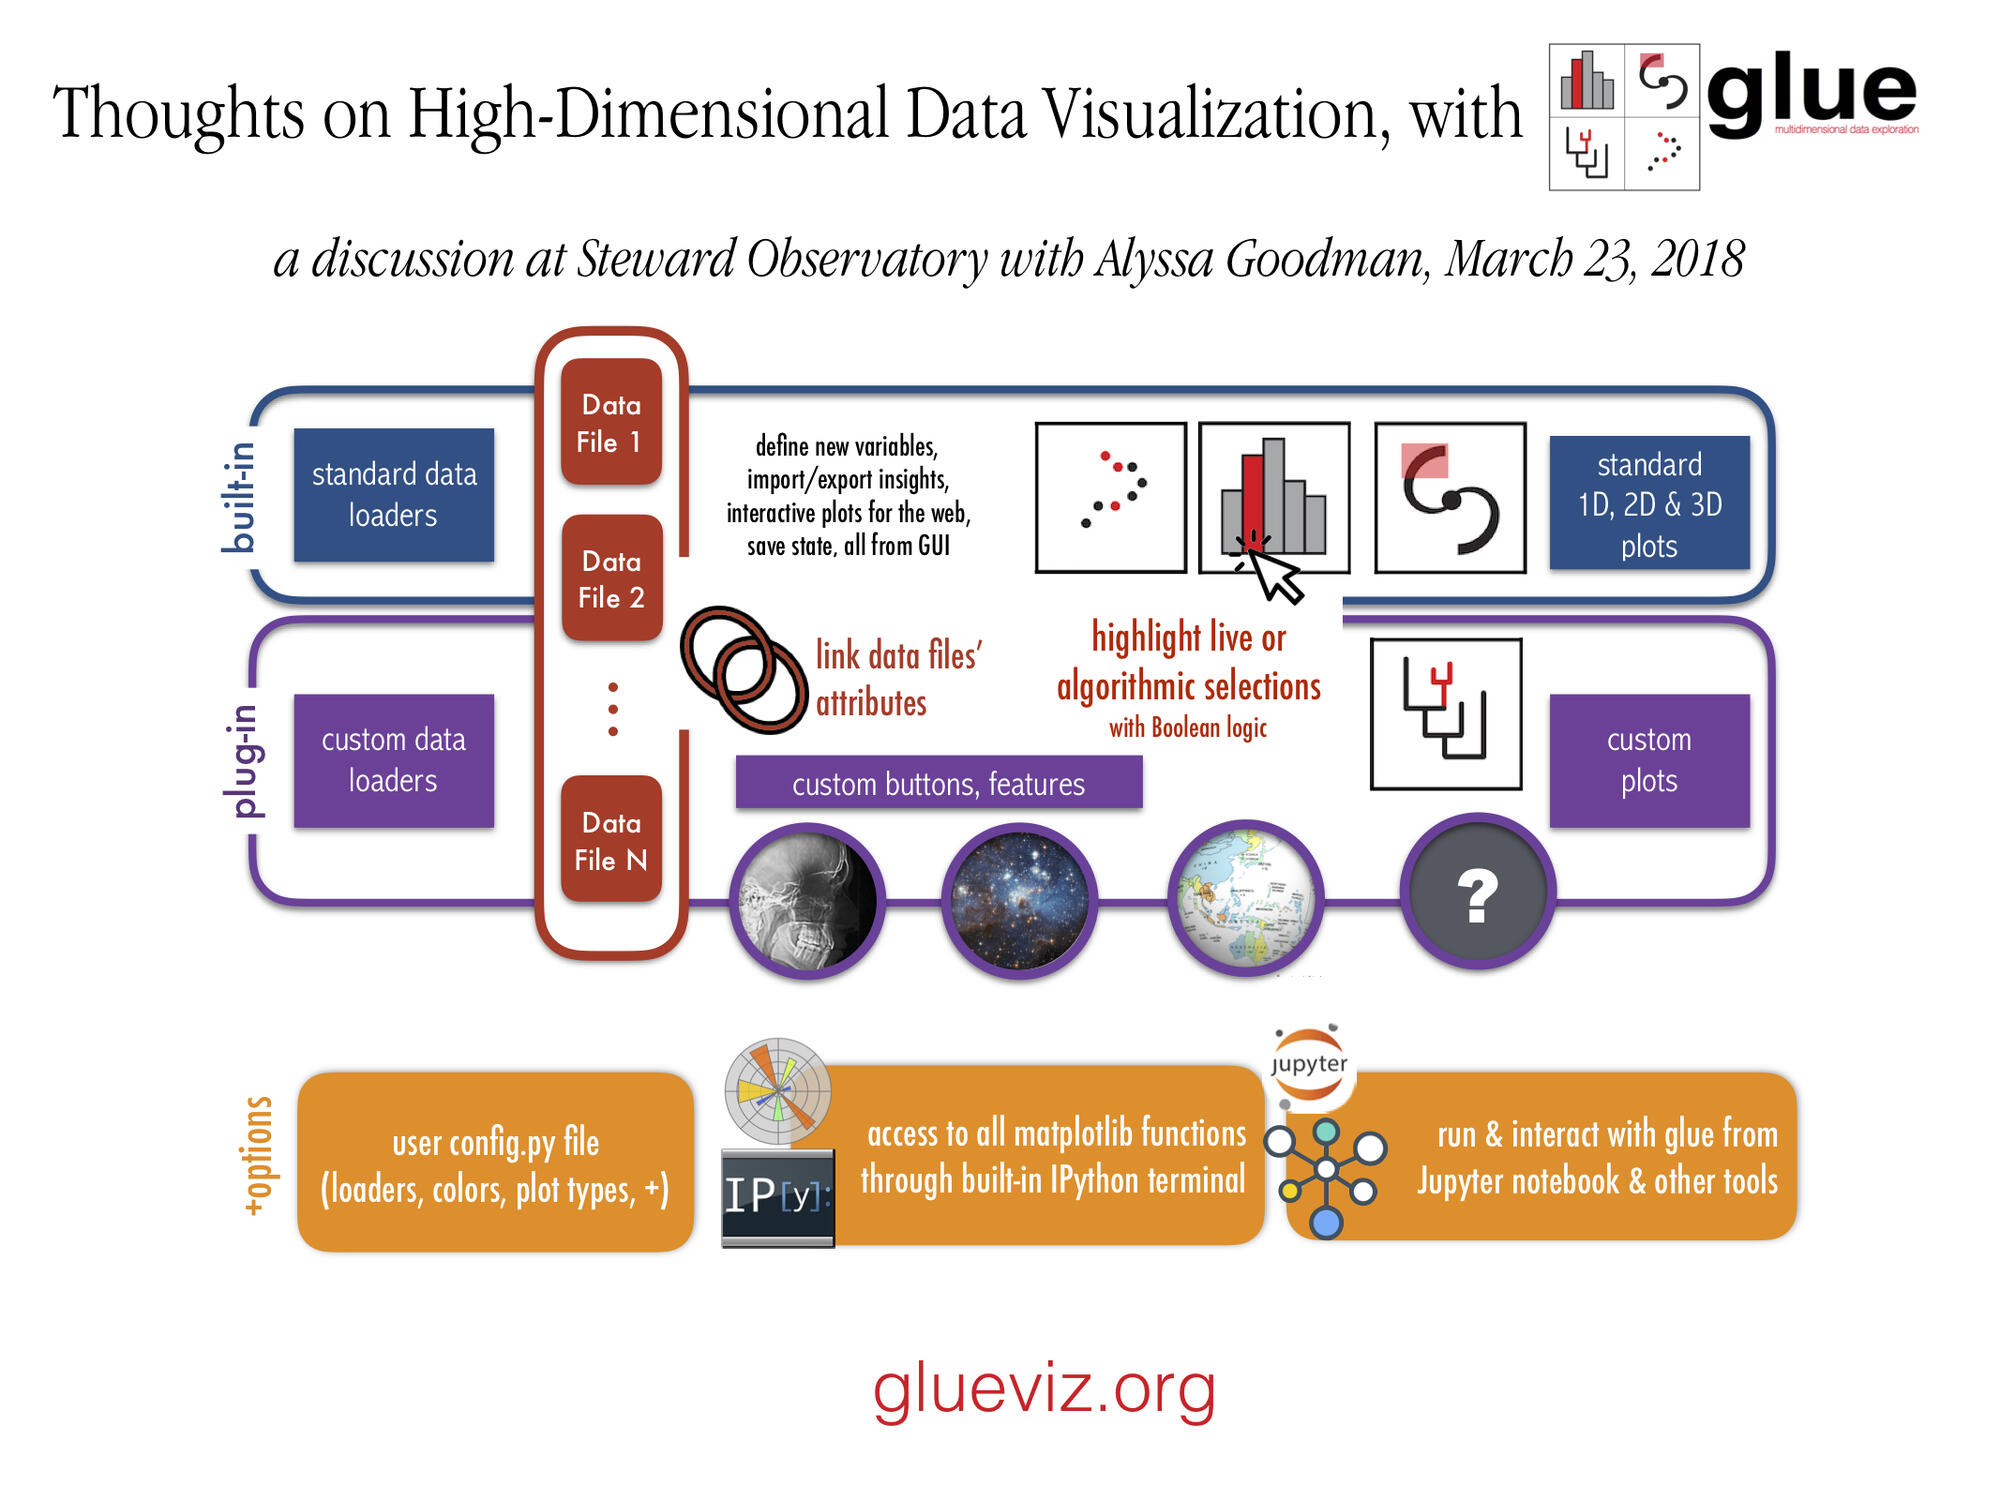 Cover page of slide deck for "Thoughts on High-Dimensional Data Visualization, with glue"